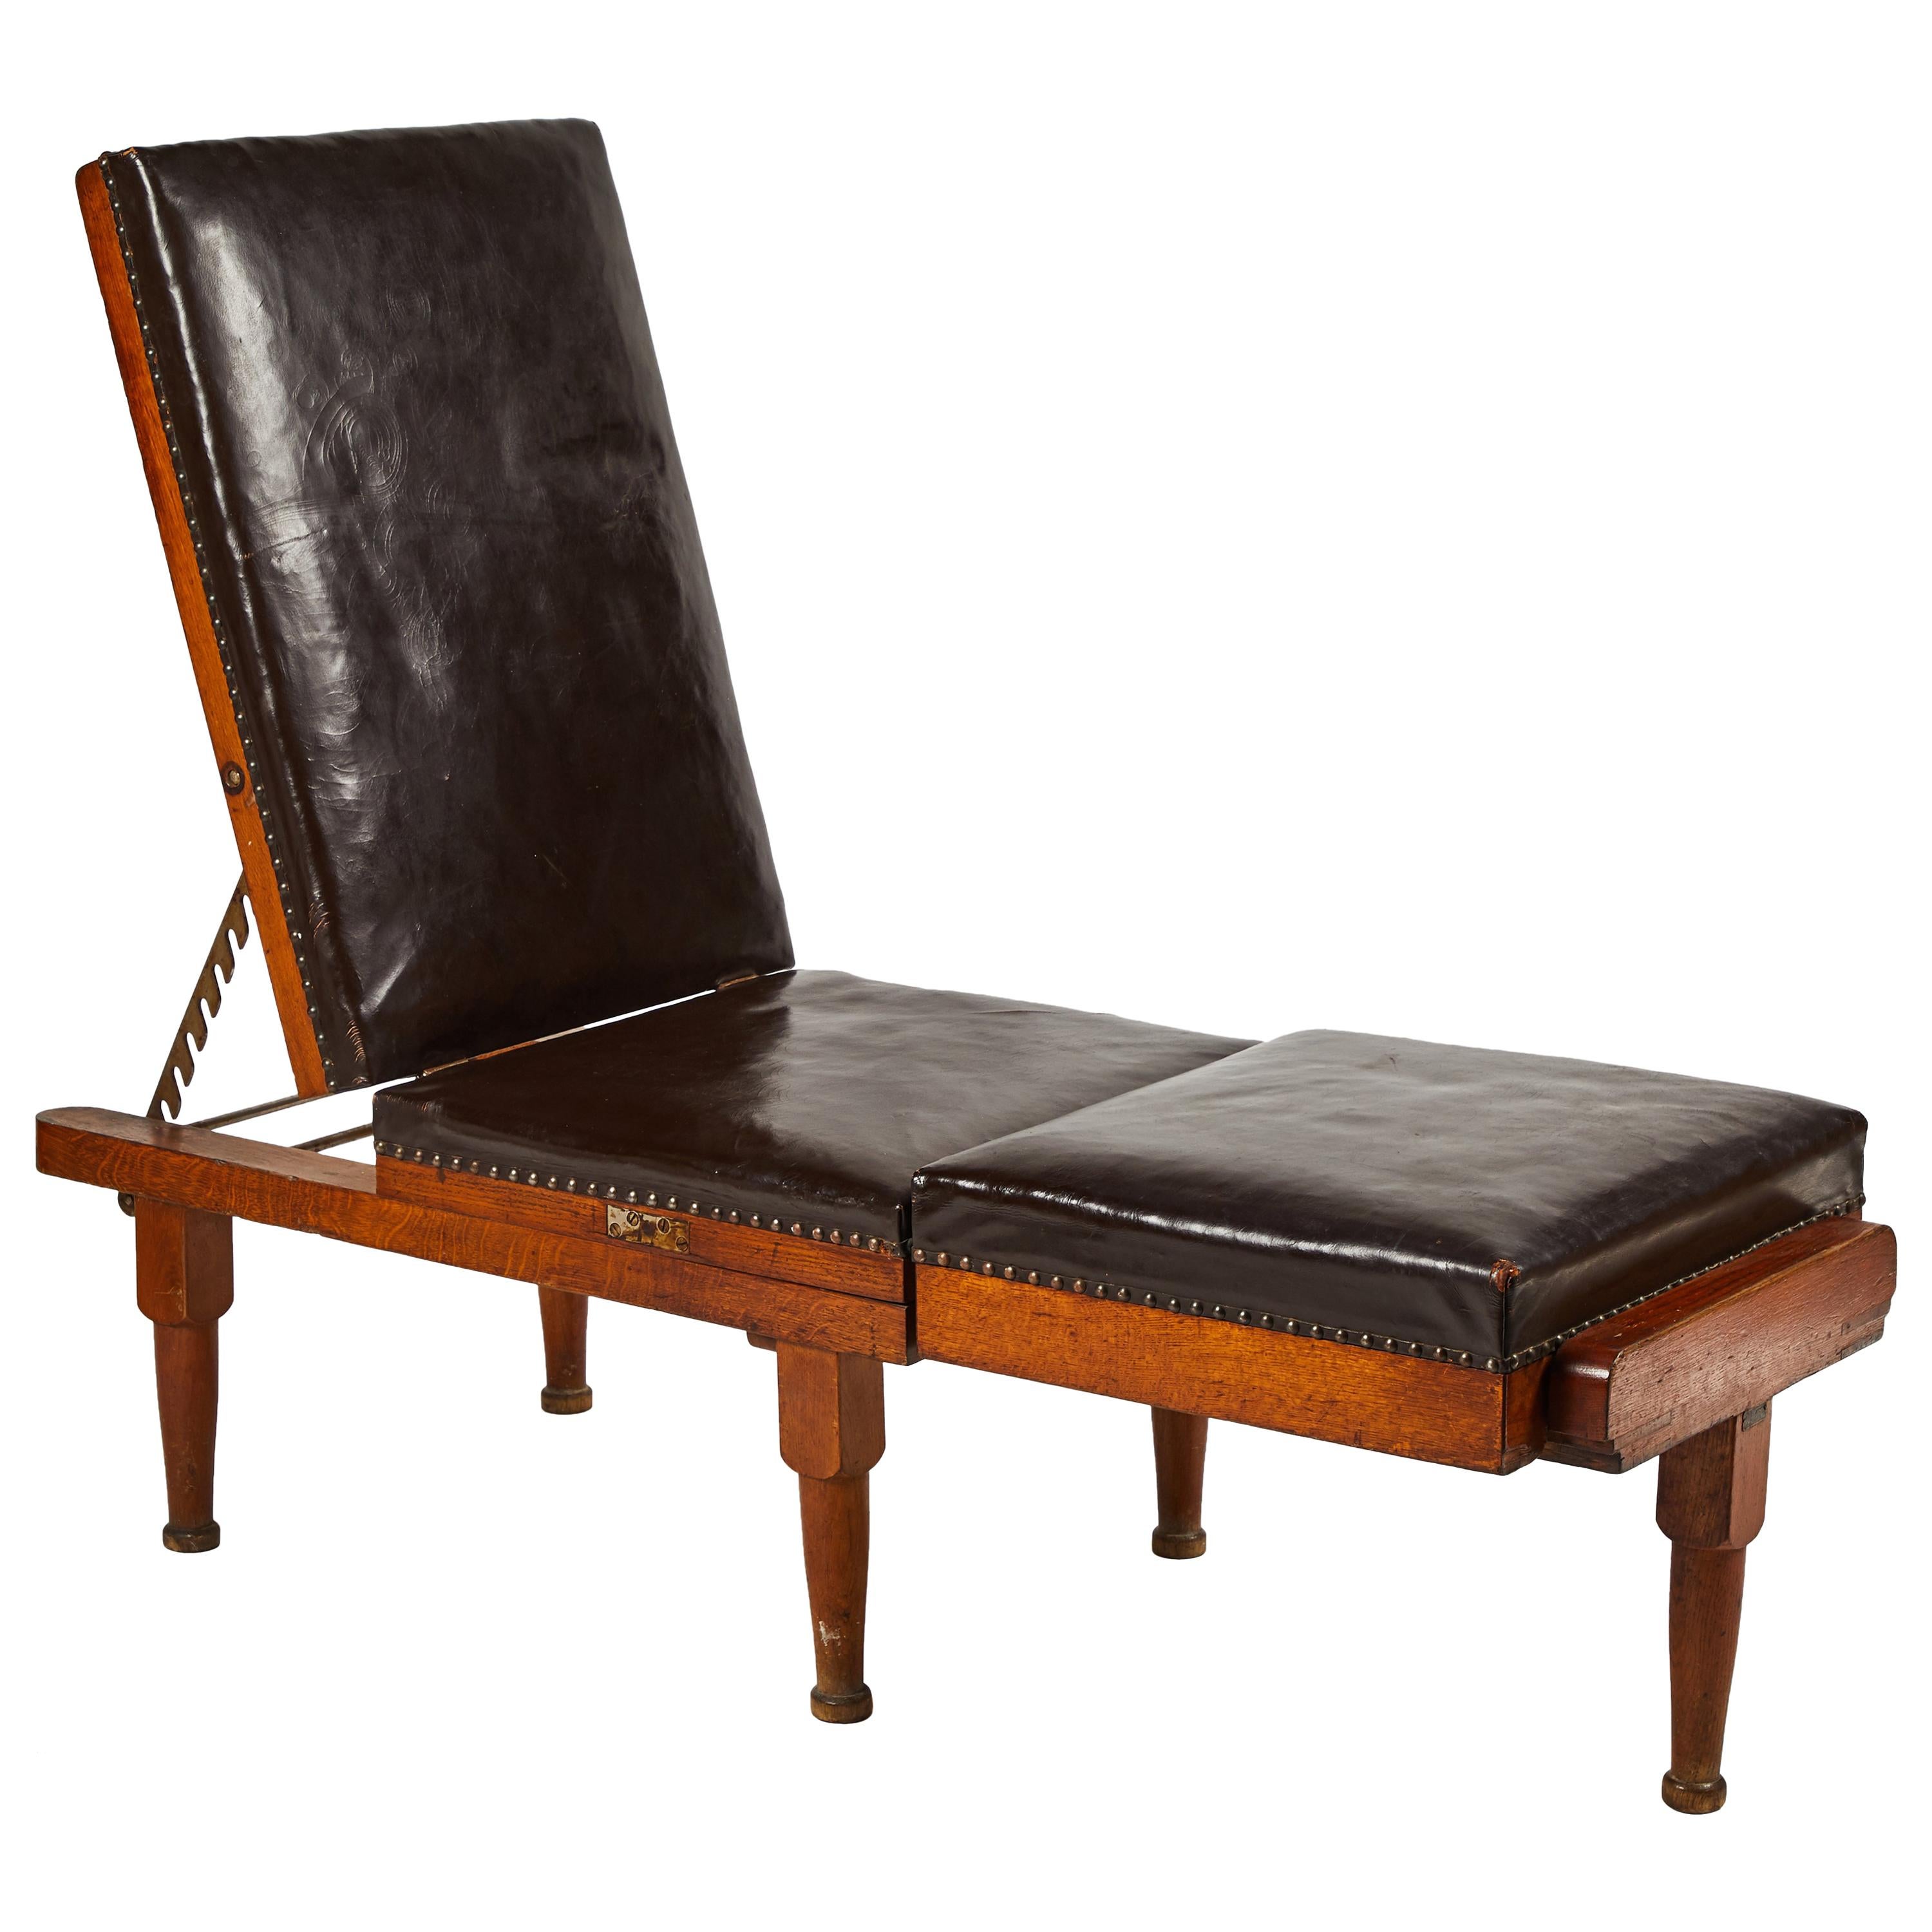 Reclining Mahogany and Leather Upholstered Chaise from Mid-19th Century France